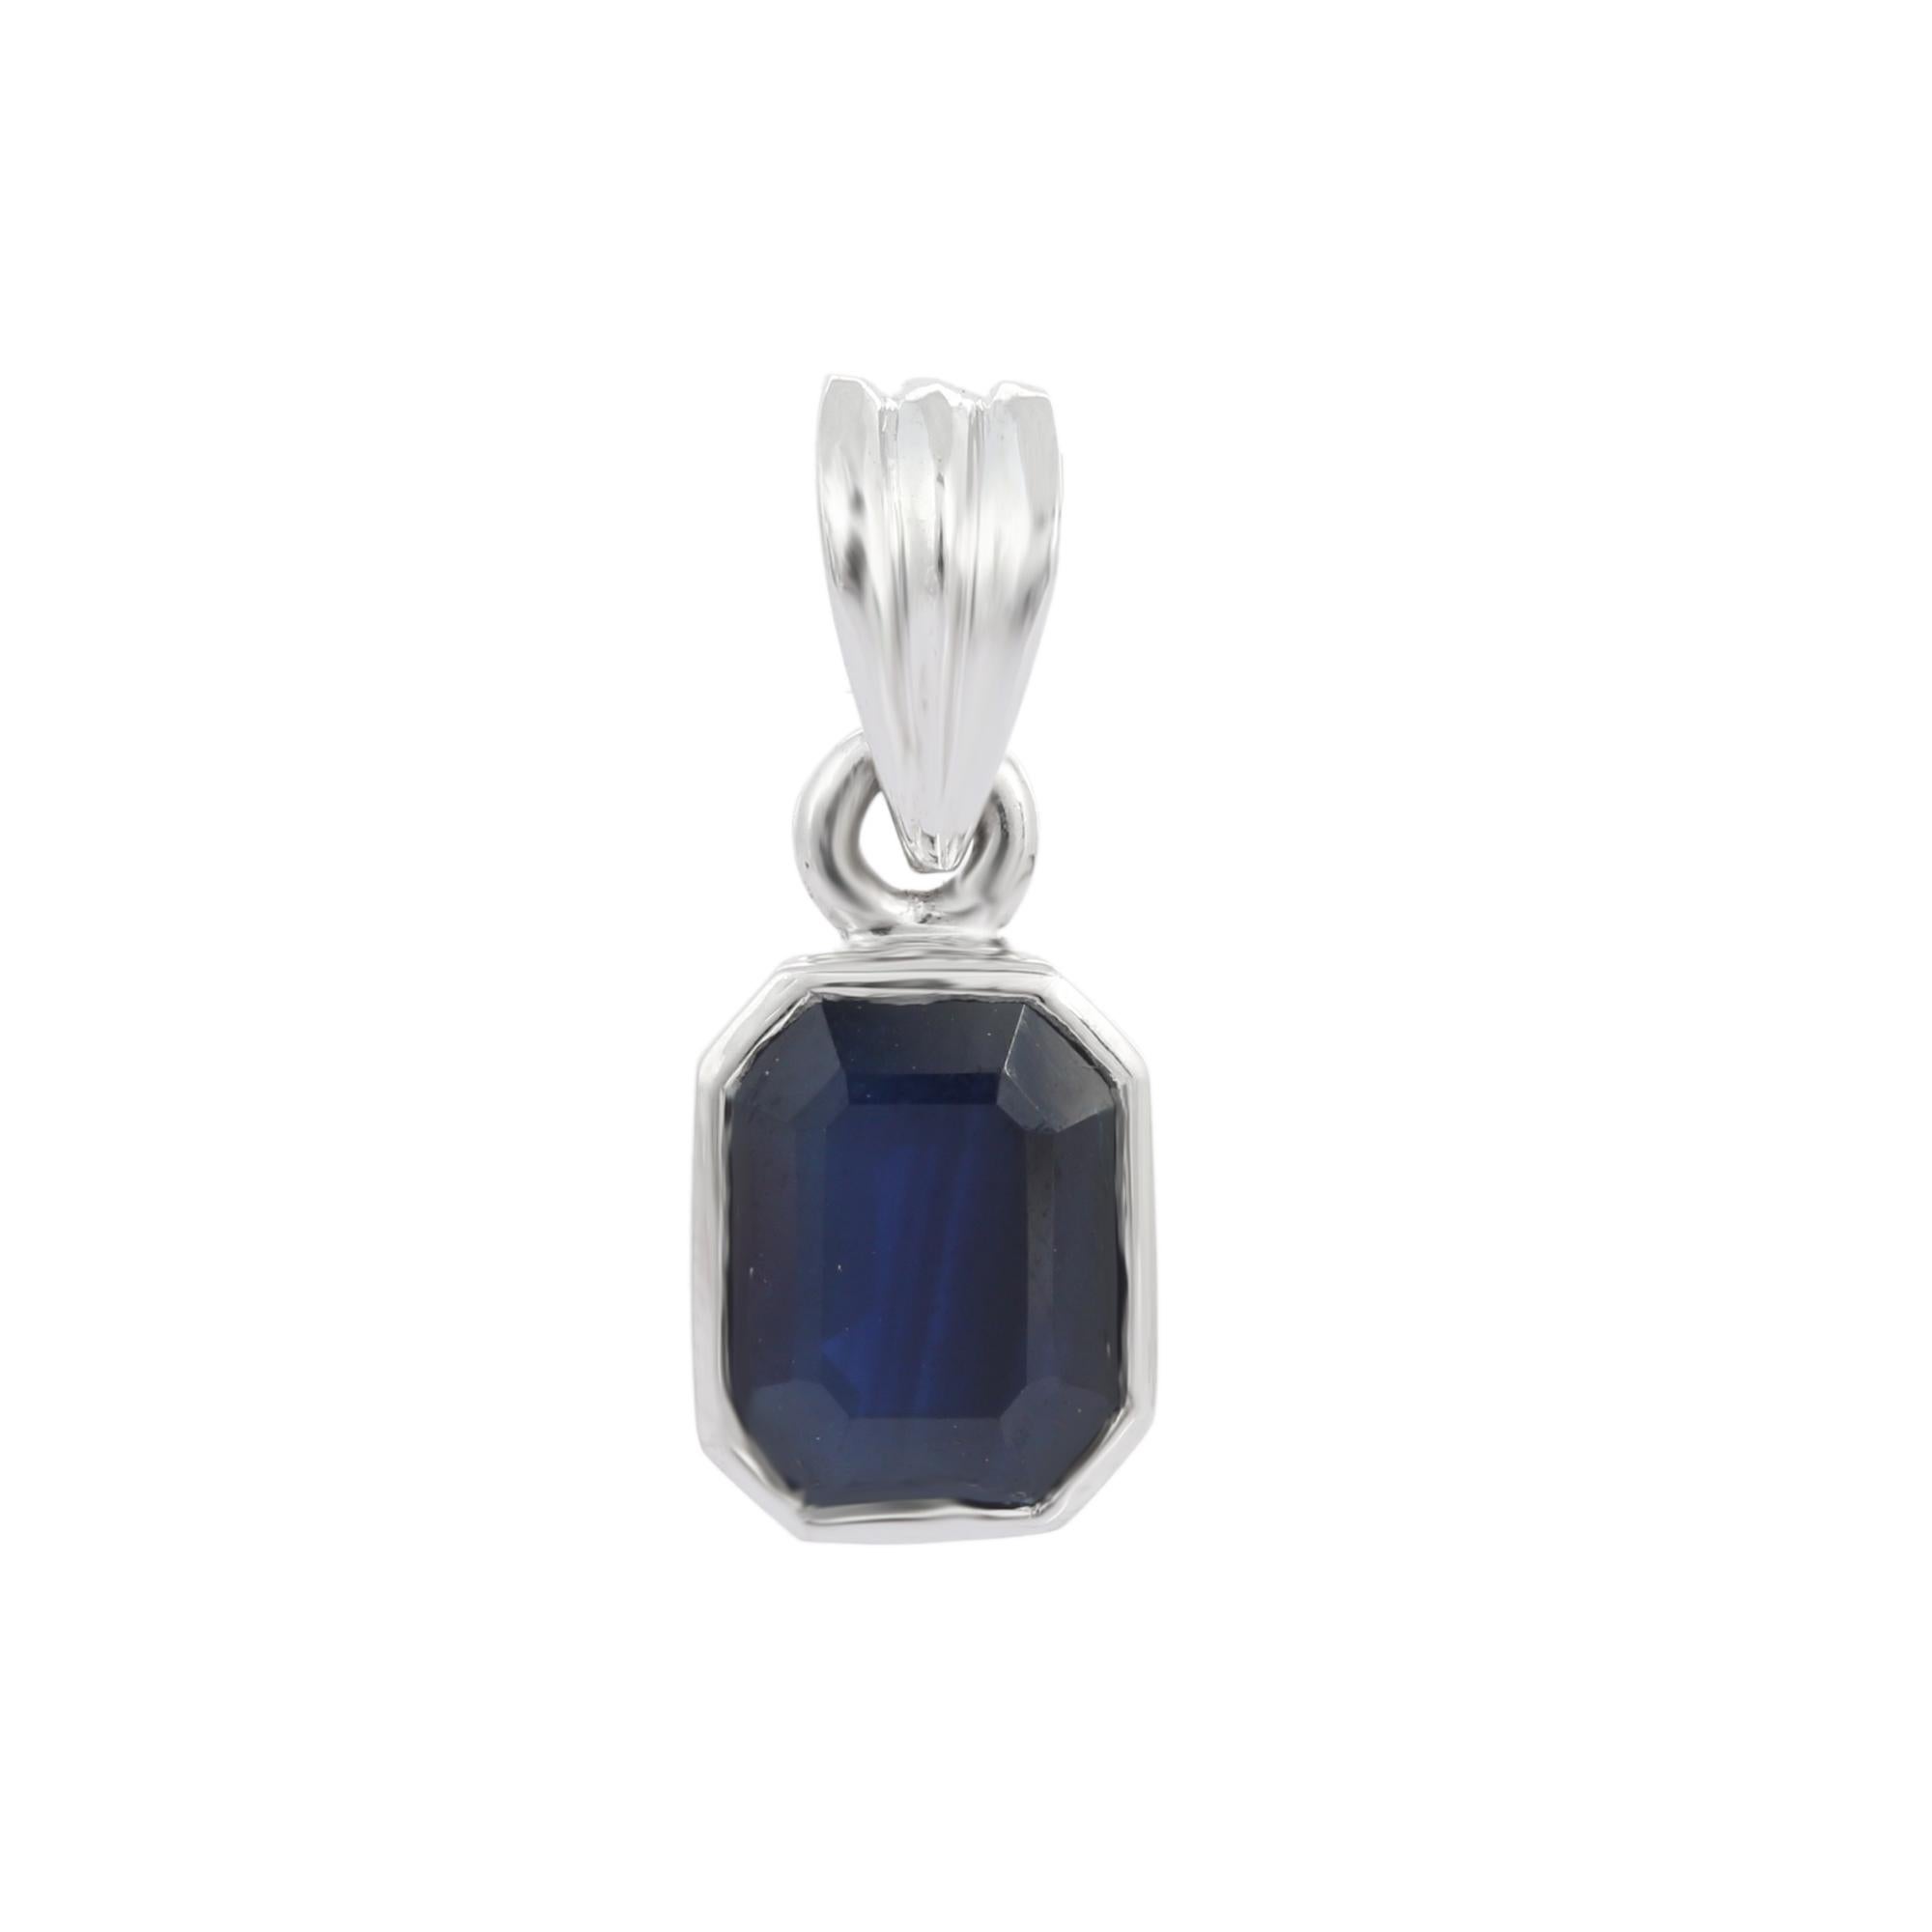 2.35 Carat Octagon Cut Blue Sapphire Pendant in 18K White Gold In New Condition For Sale In Houston, TX